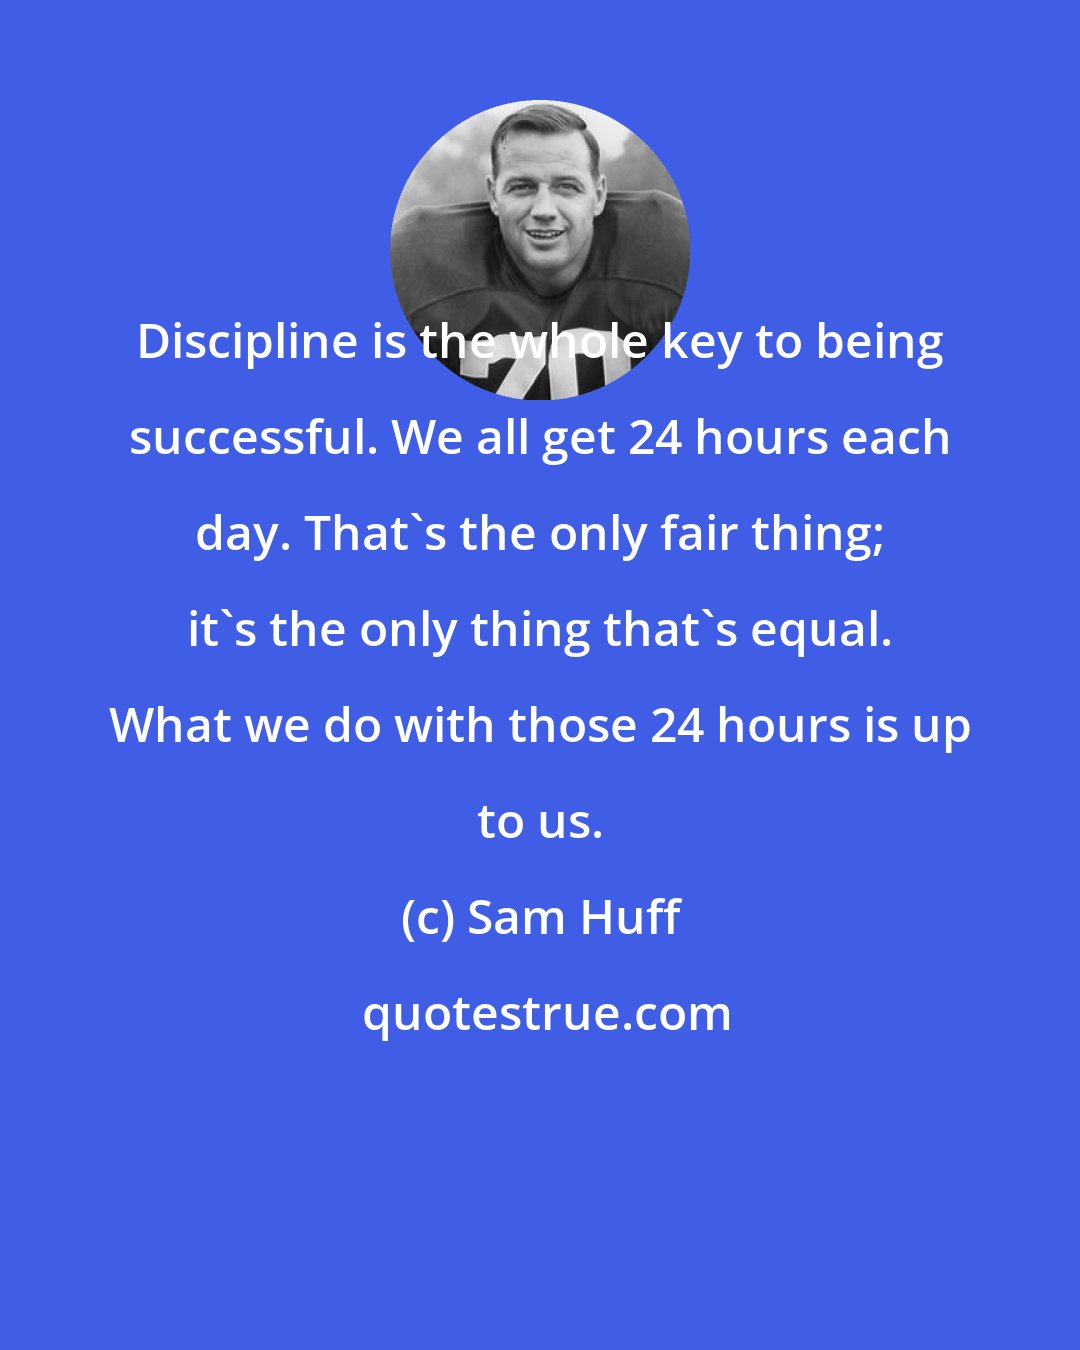 Sam Huff: Discipline is the whole key to being successful. We all get 24 hours each day. That's the only fair thing; it's the only thing that's equal. What we do with those 24 hours is up to us.